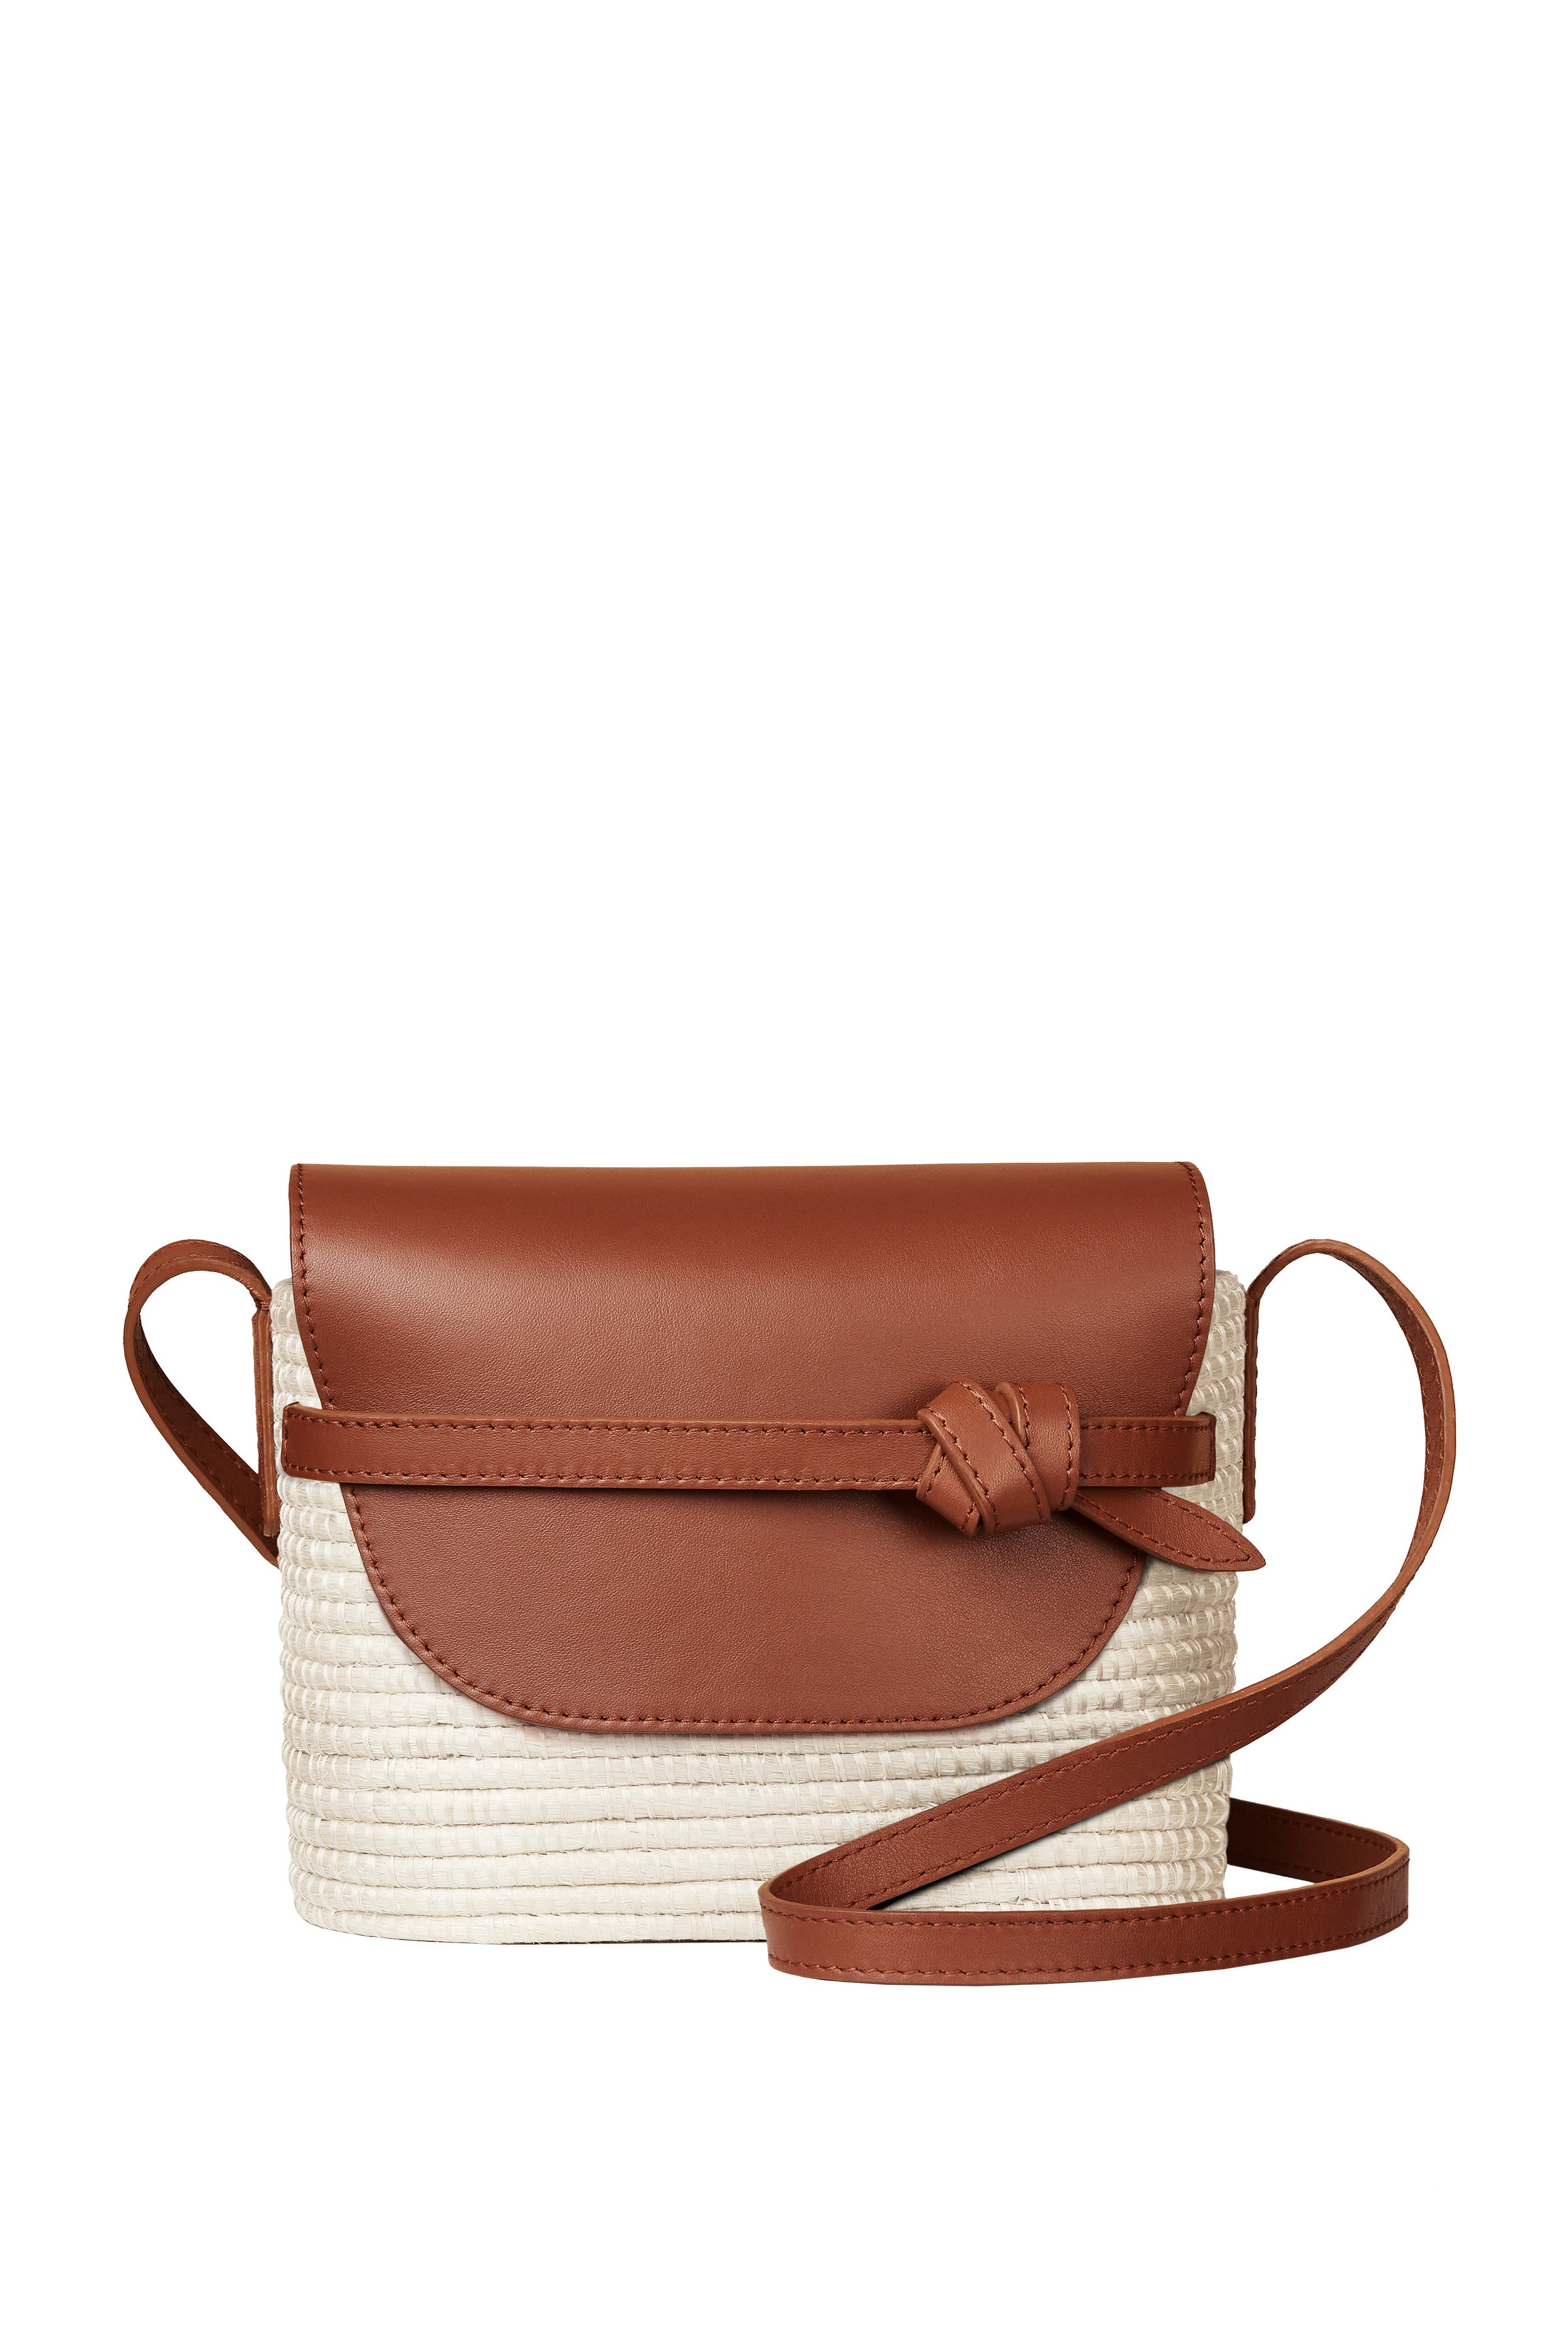 Integrity Luxe Travels Handbag with Long Strap